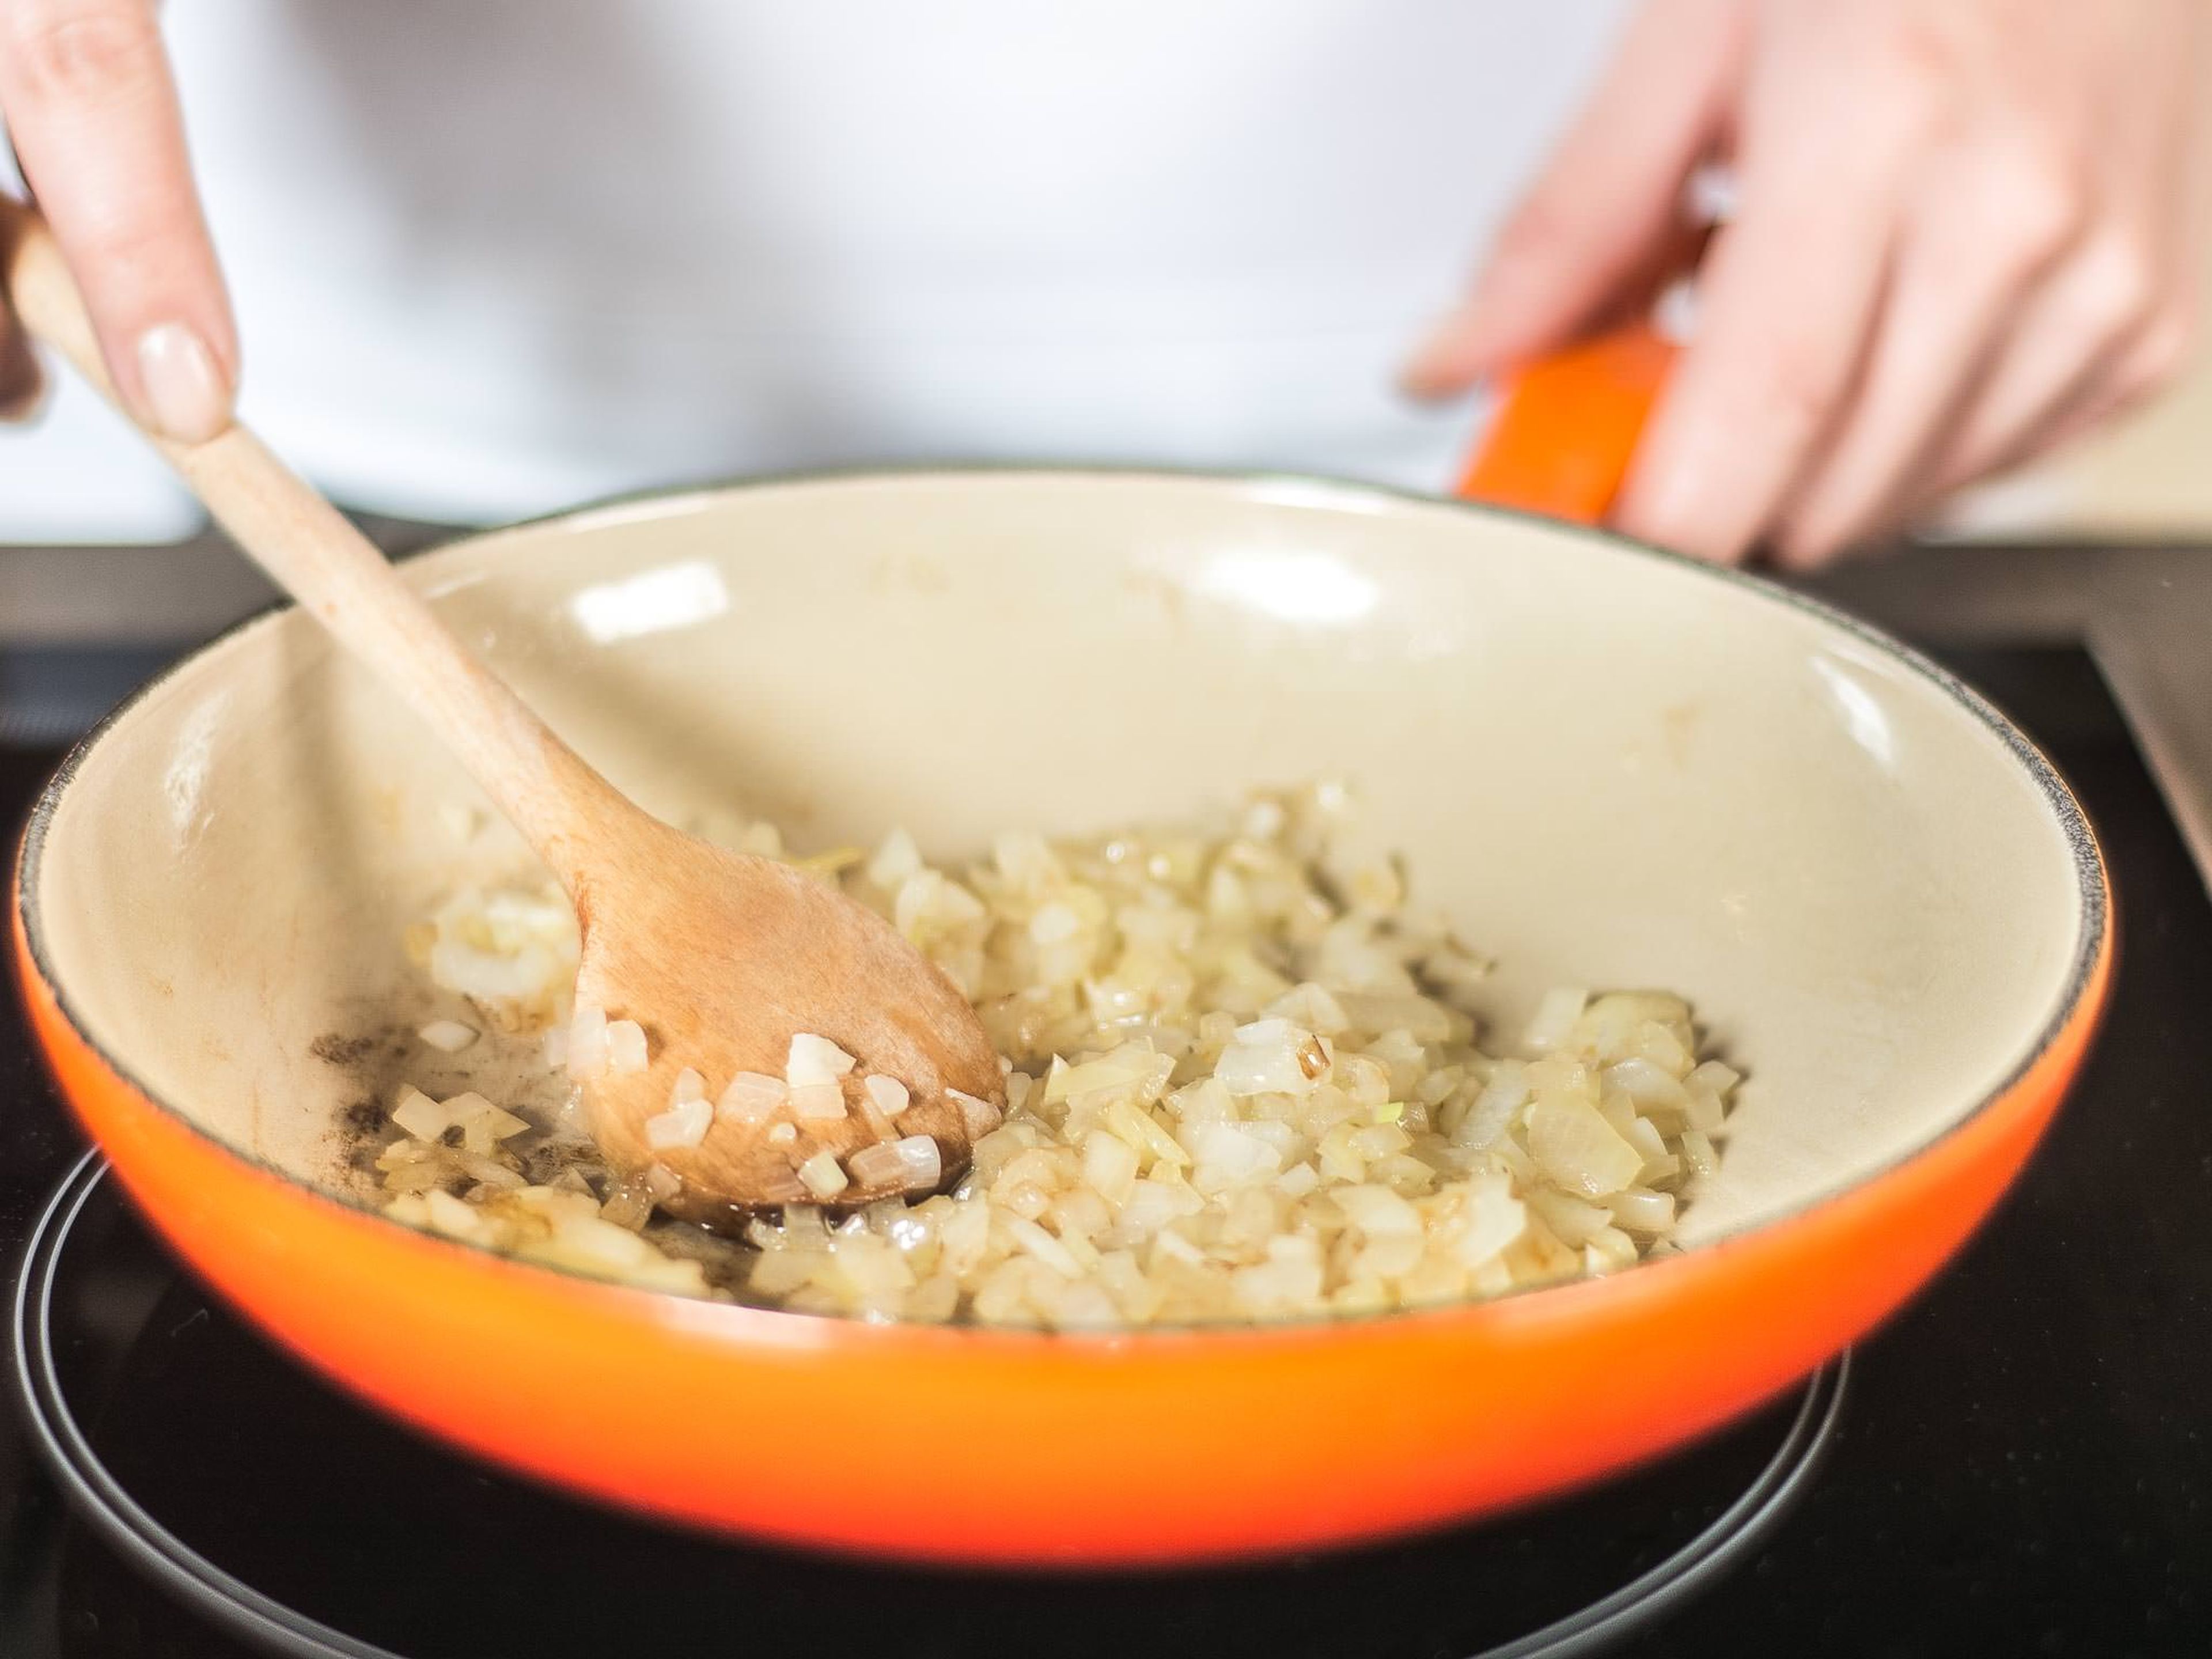 Sauté both in a small frying pan in some vegetable oil until the onion is translucent.